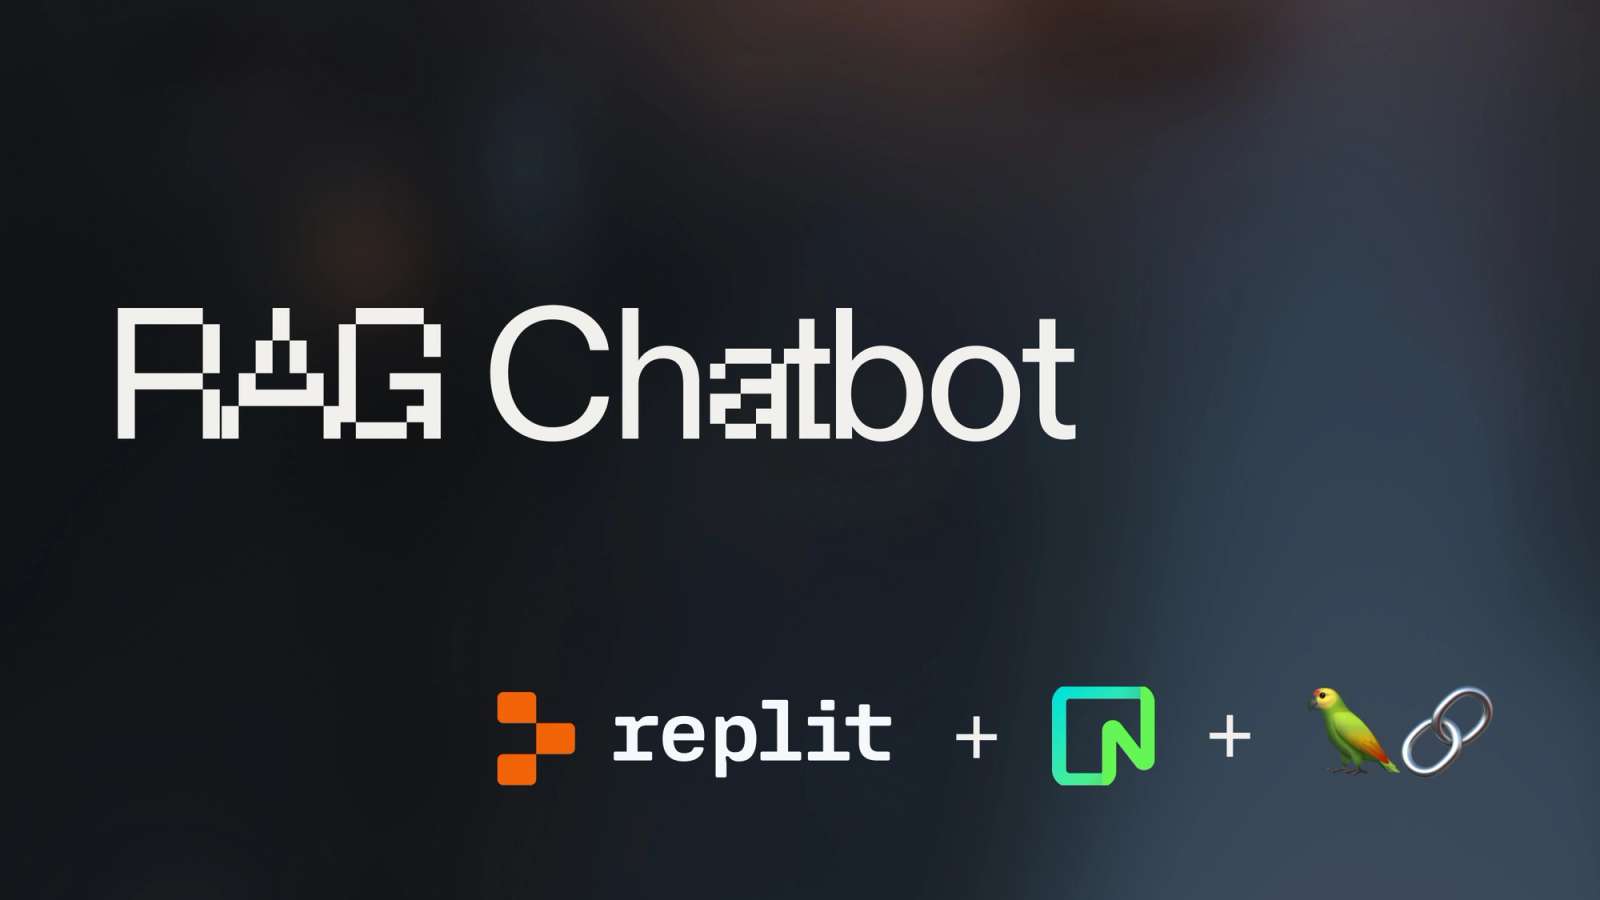 Build a chatbot that can answer questions on a website